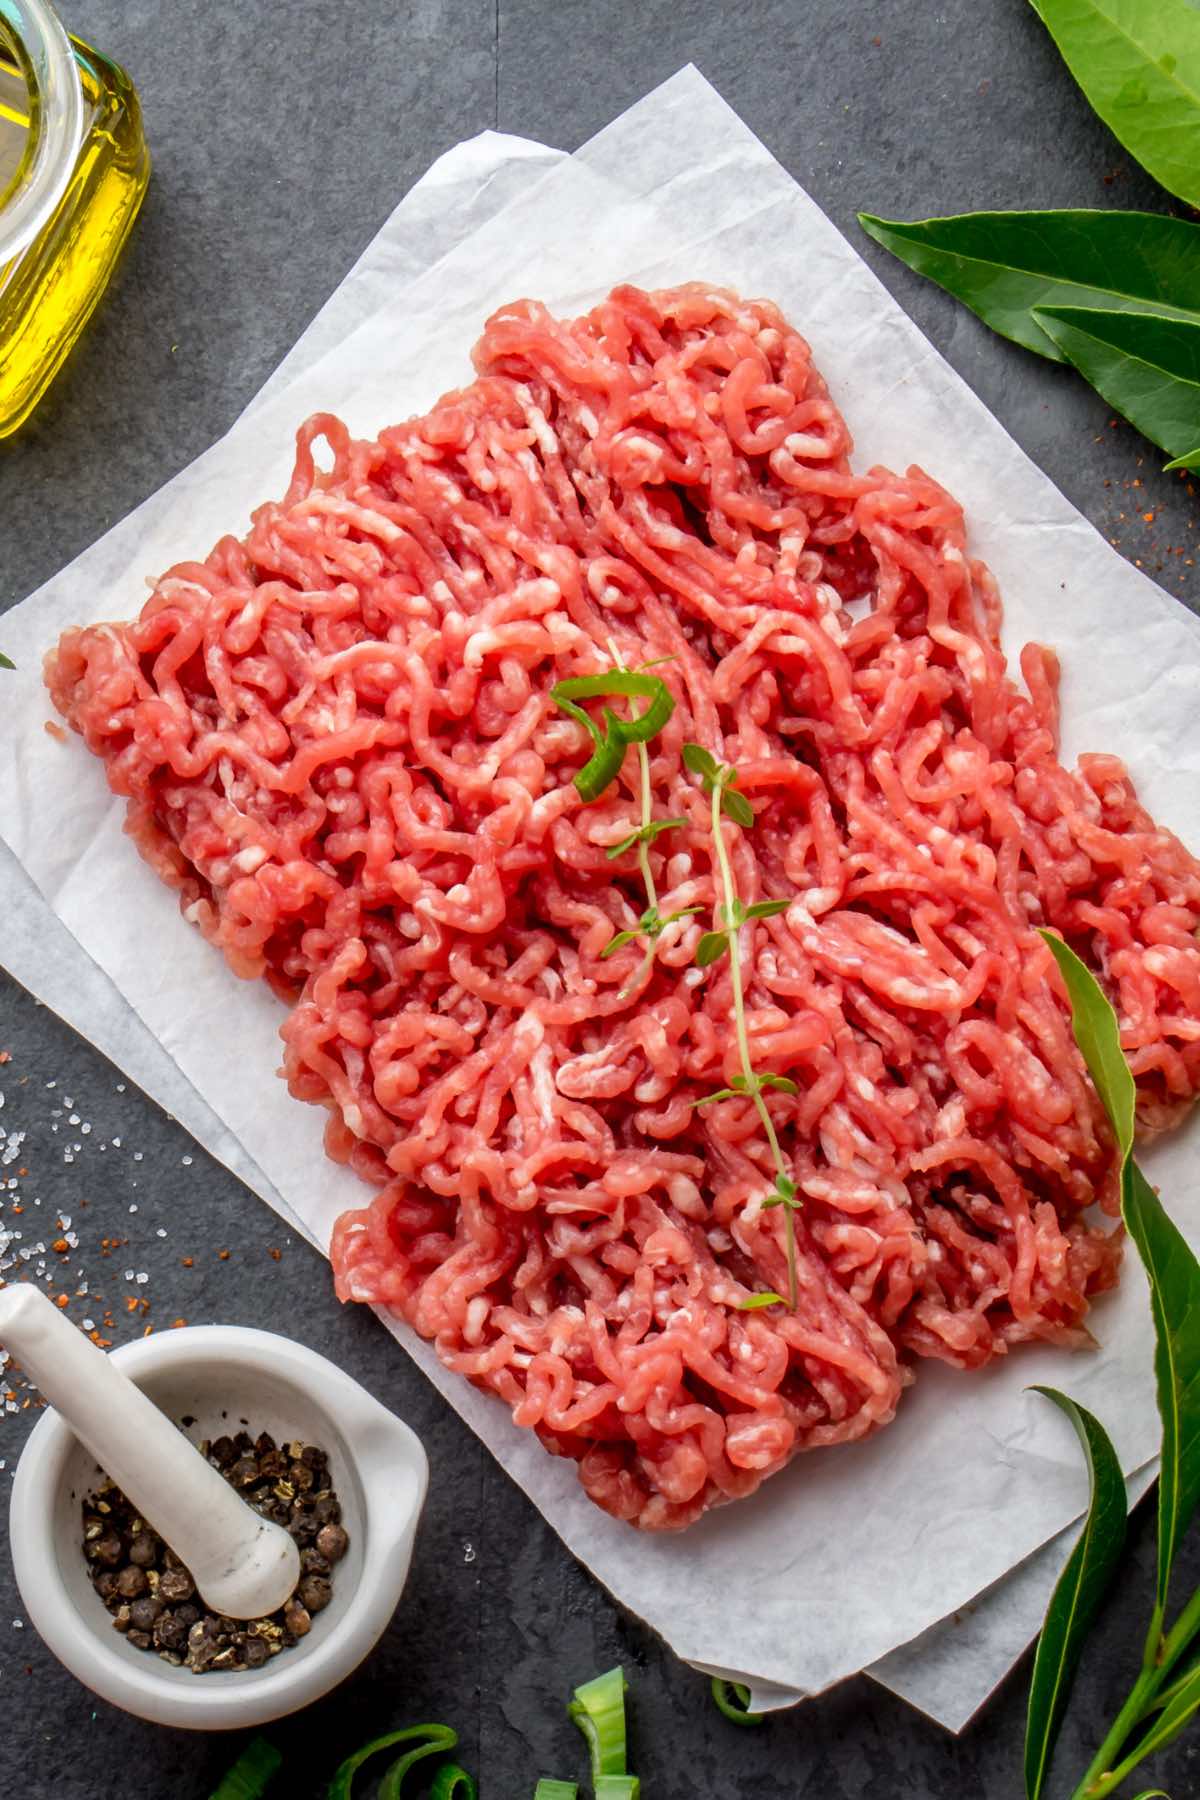 Ground beef is an easy ingredient for meal prep or bulk cooking. How long does ground beef last and how can you ensure you’re having the safest, best quality beef with all your meals? This simple guide provides insight for both cooked and raw ground beef.